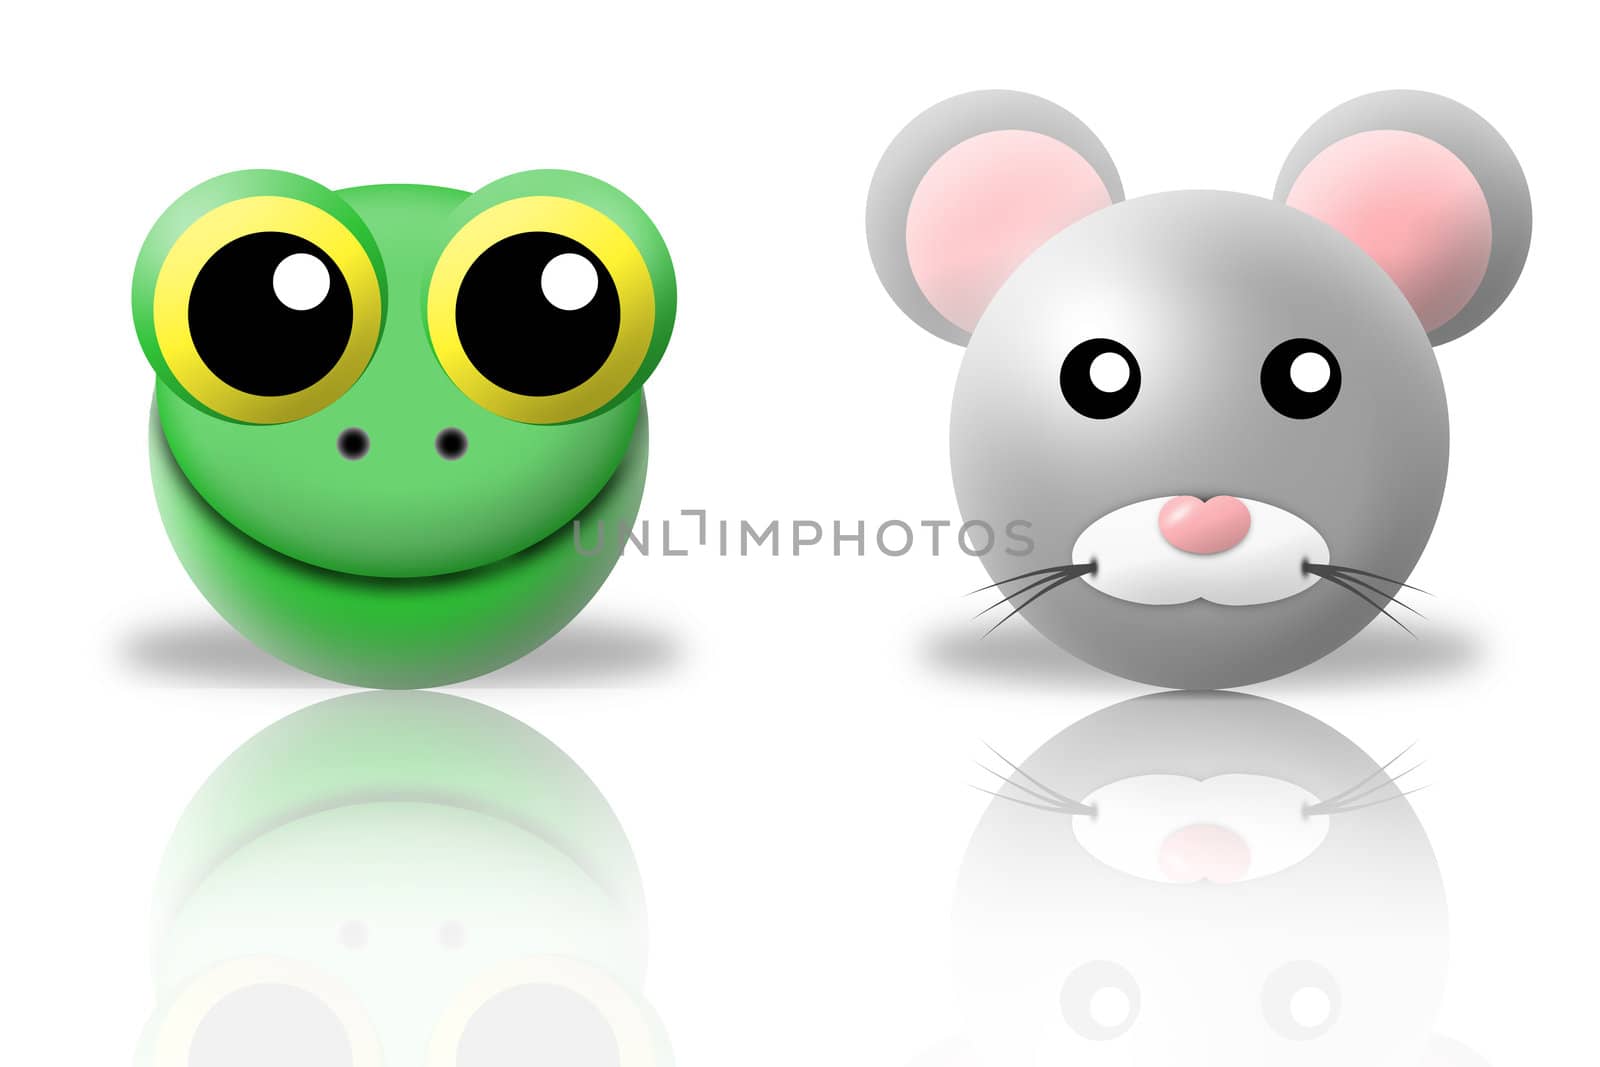 animals icons - frog and mouse. white background and reflection
